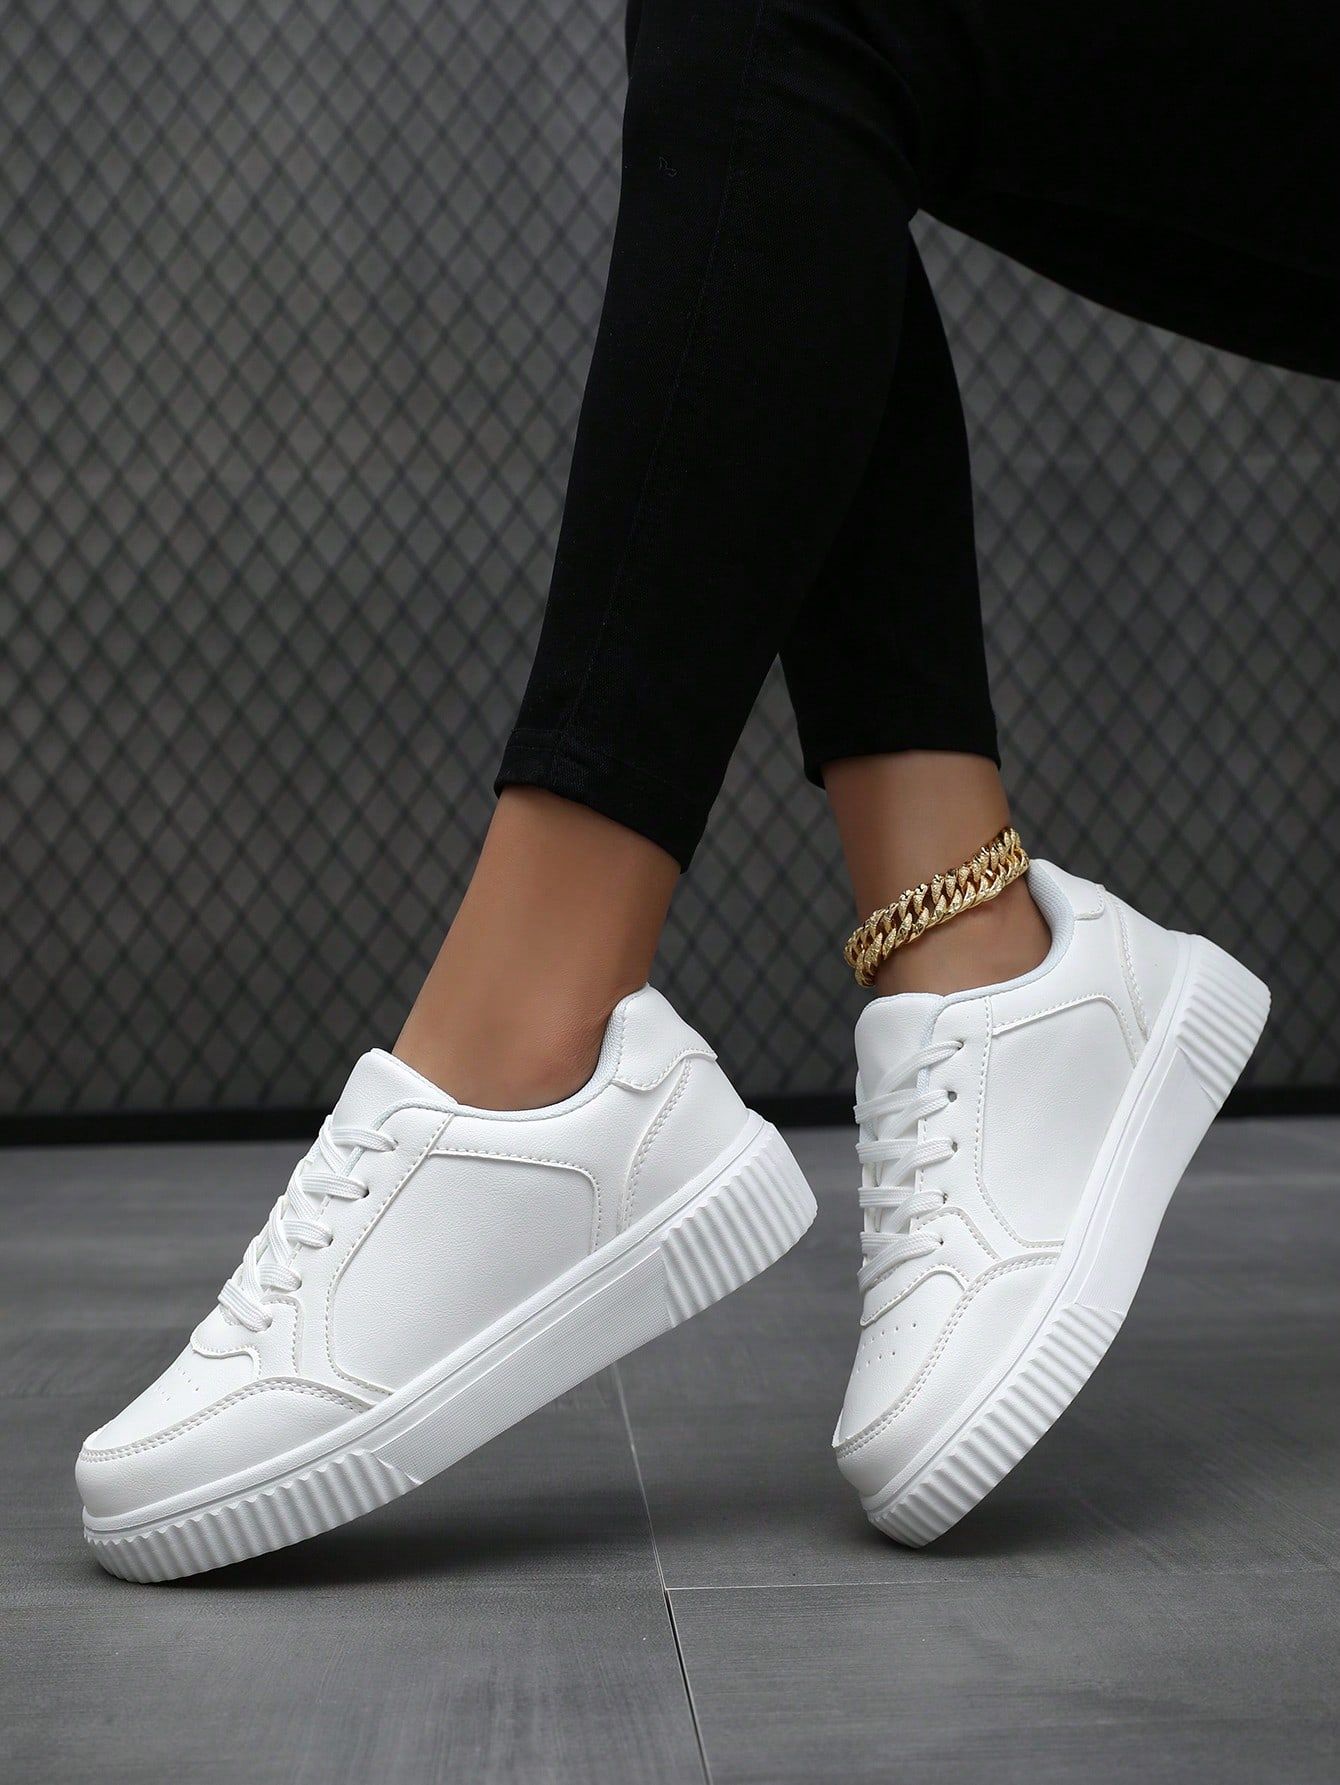 Women Minimalist Lace-up Front Casual Shoes, Sport Outdoor Skate Shoes | SHEIN